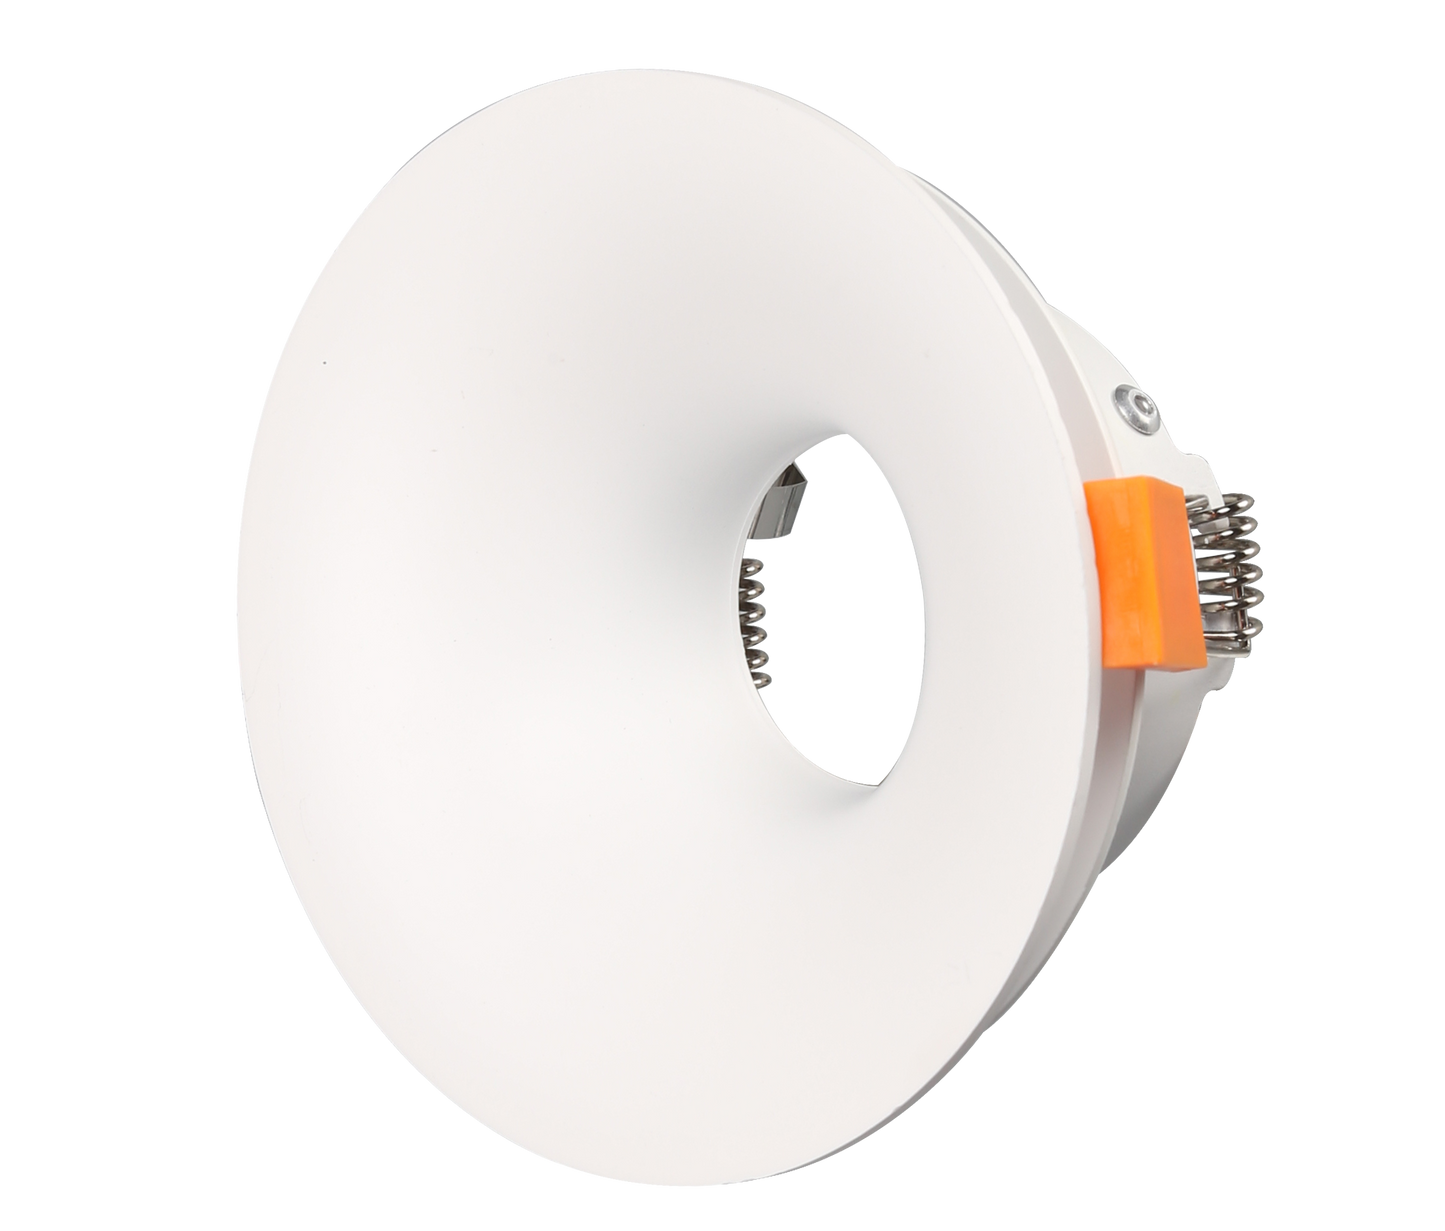 RF11 White- Round fixed IP20 surface mount trim with double fluted shadow ring for X Series COB Modules